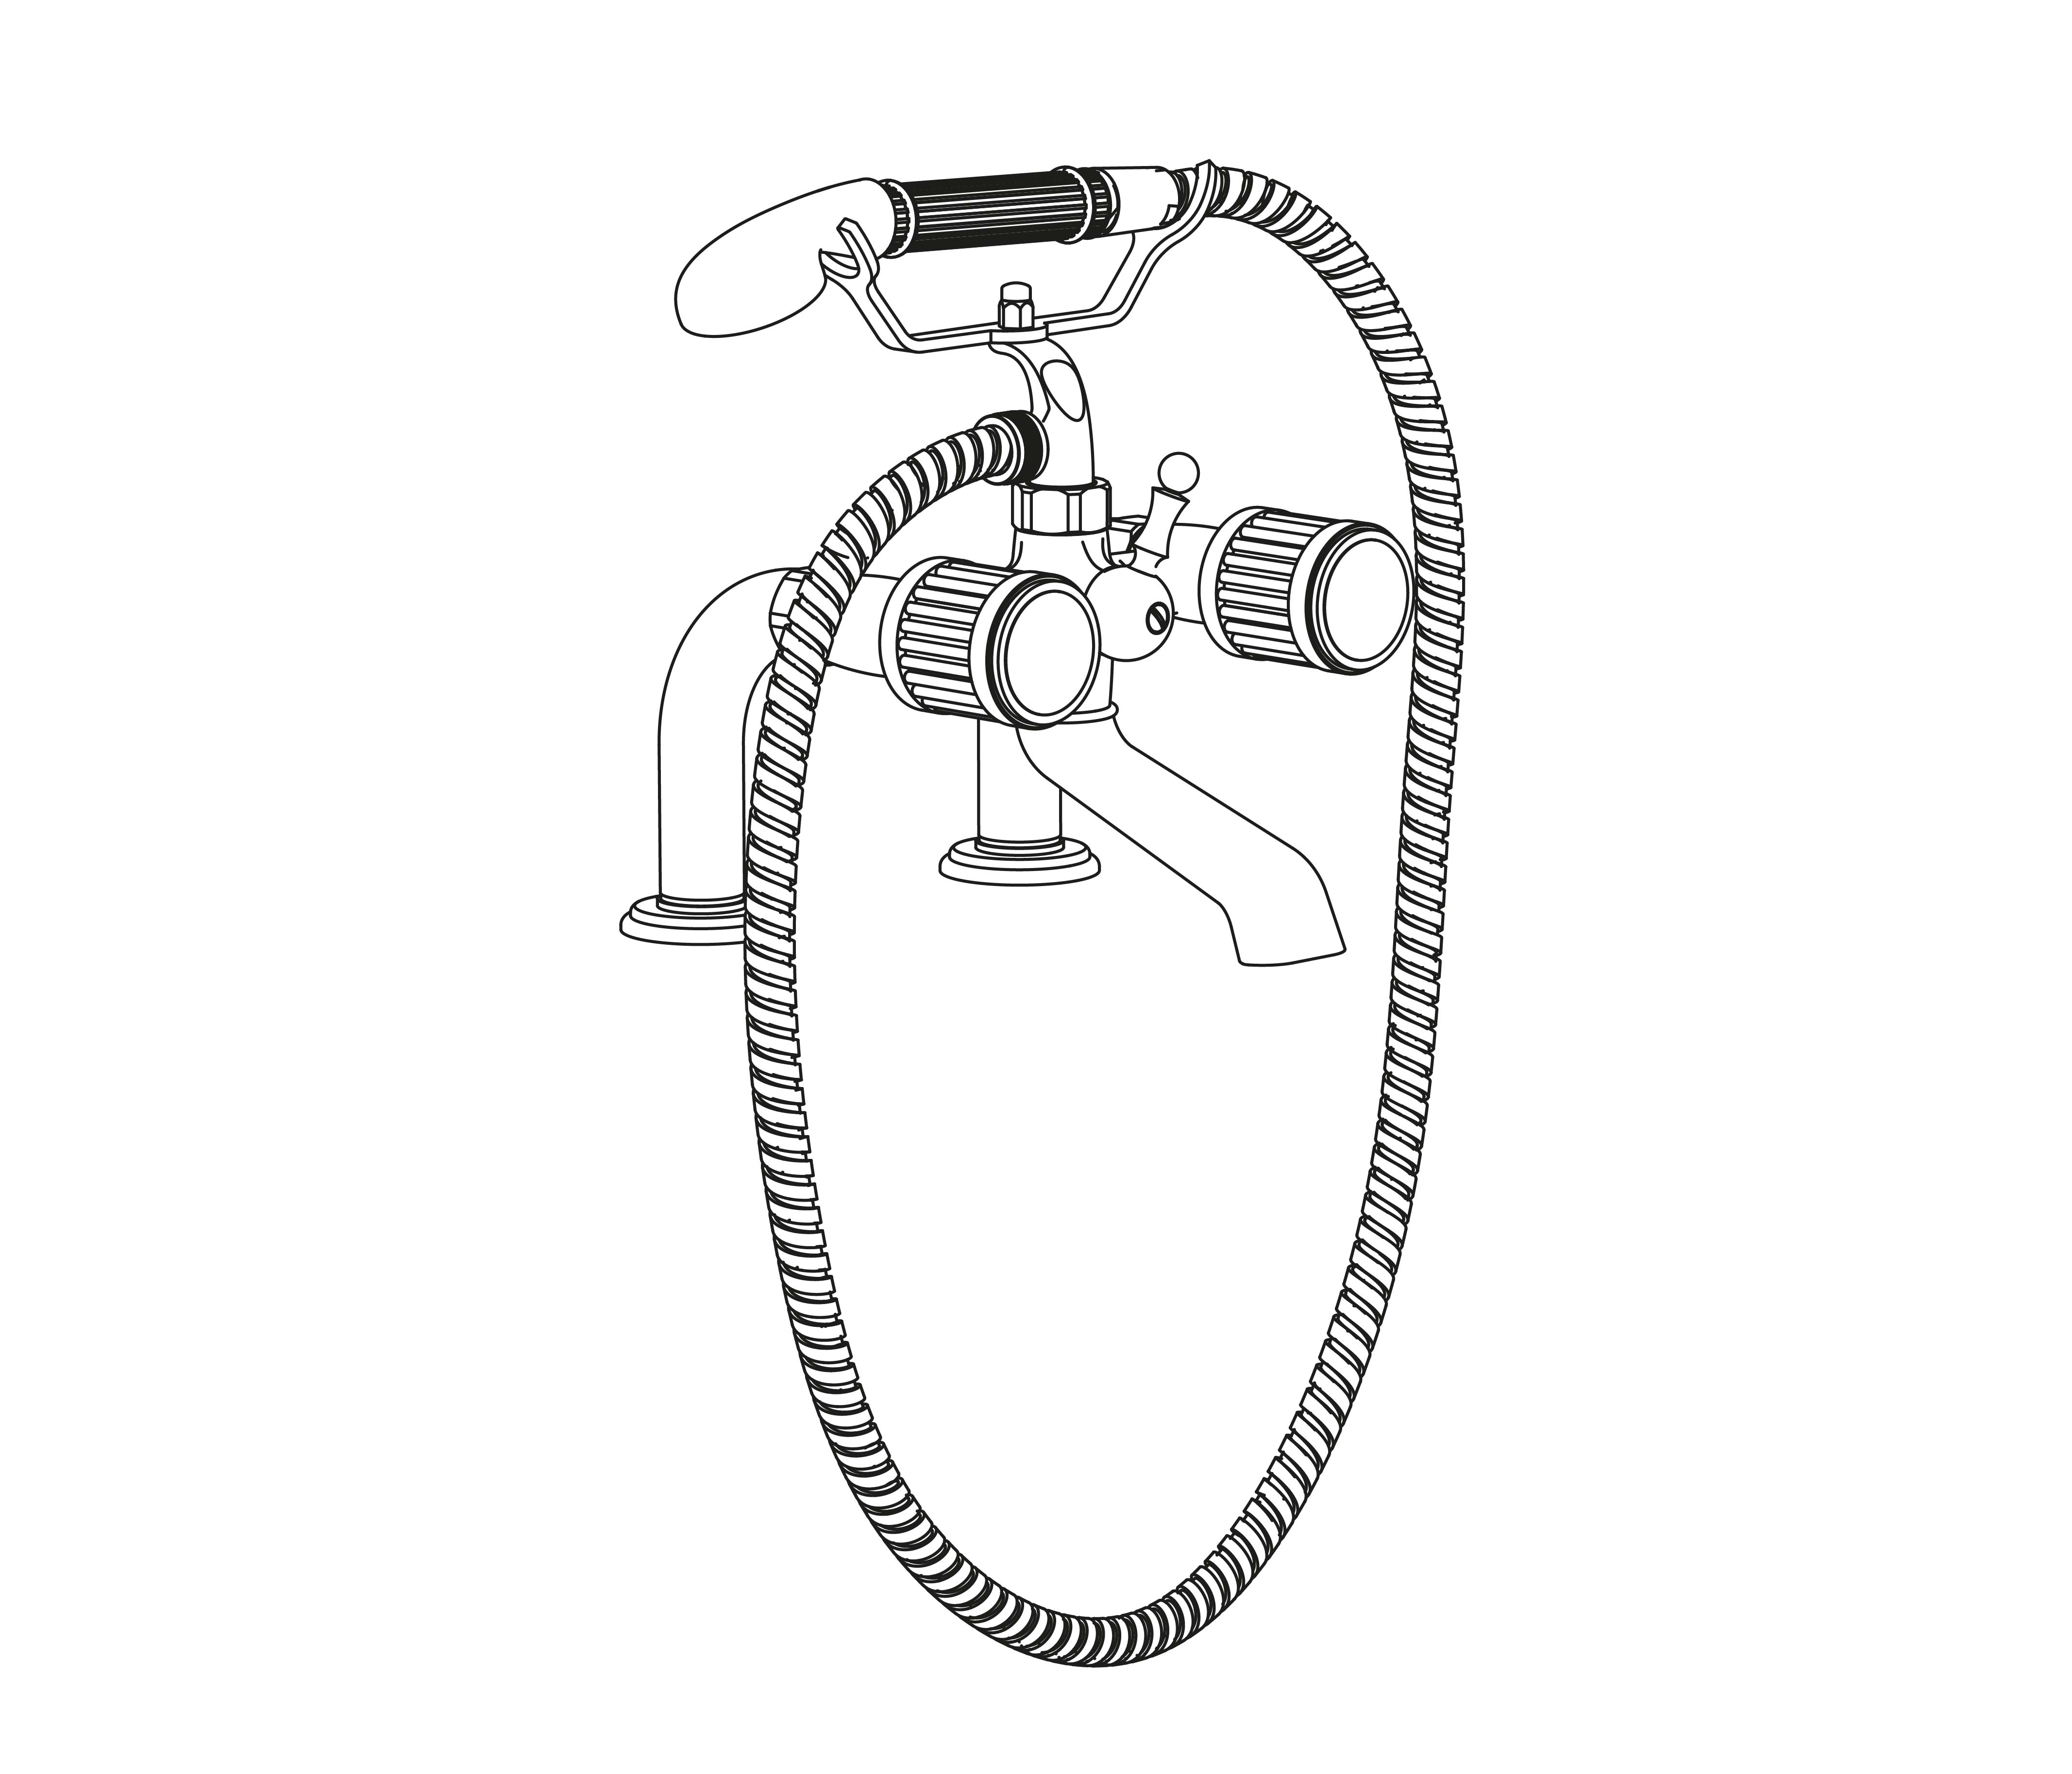 S91-3306 Rim mounted bath and shower mixer